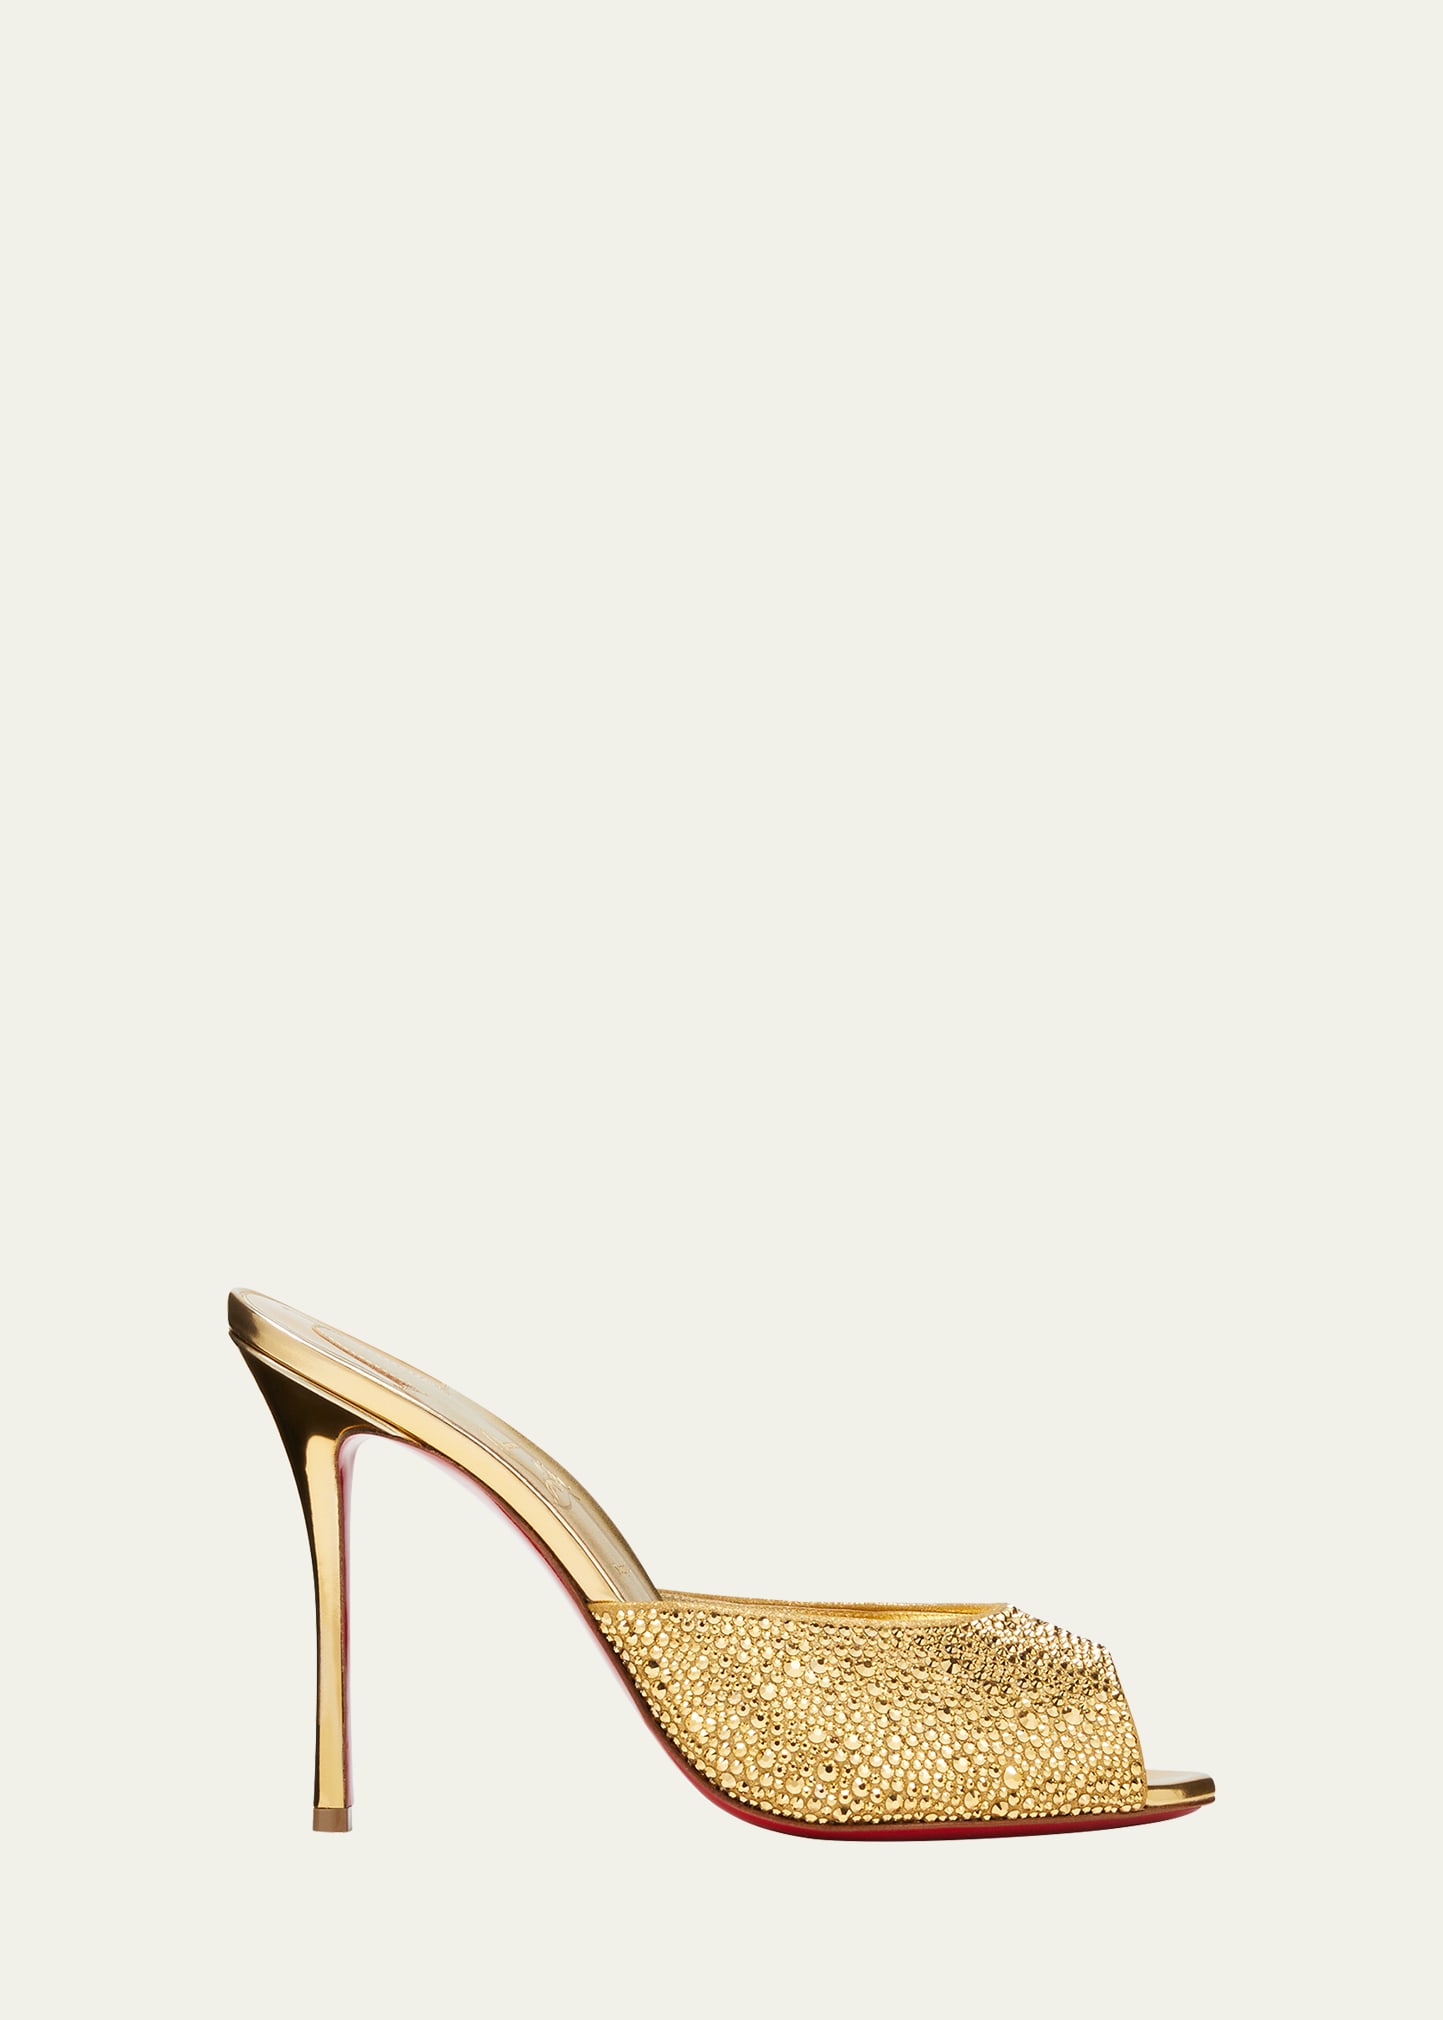 CHRISTIAN LOUBOUTIN ME DOLLY STRASS RED SOLE SLIDE SANDALS